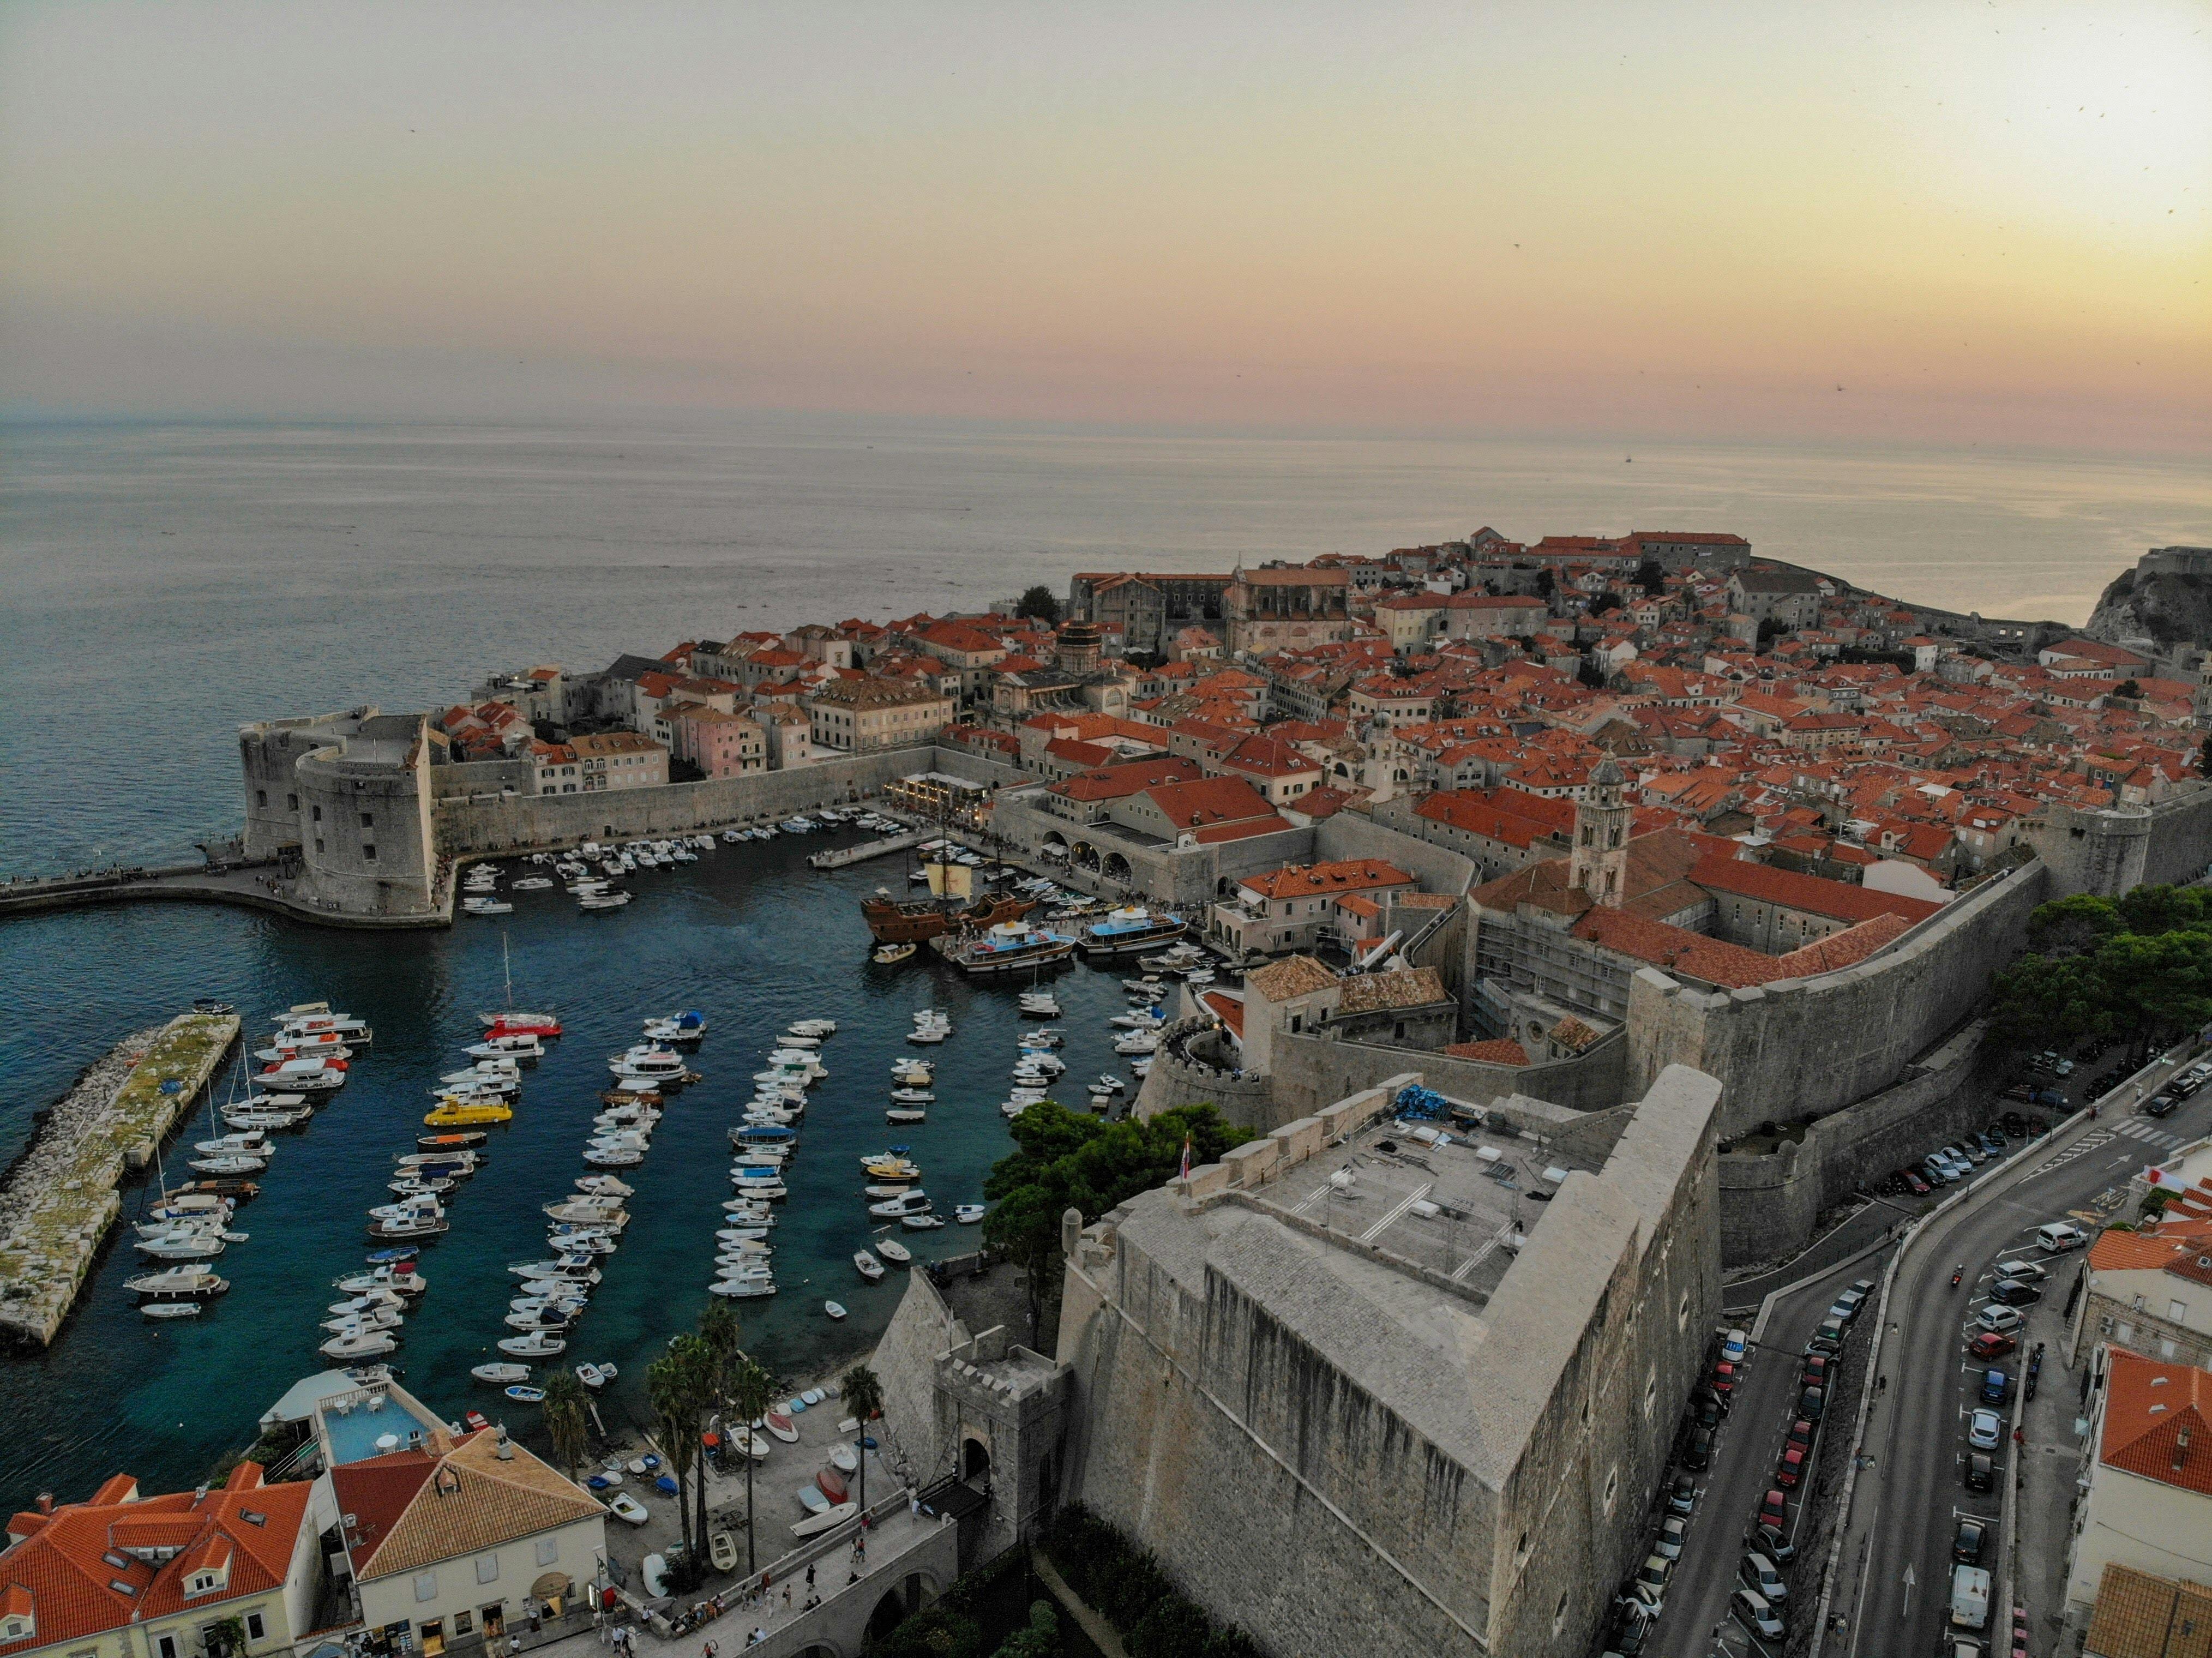 Evening stroll through the old town in Dubrovnik